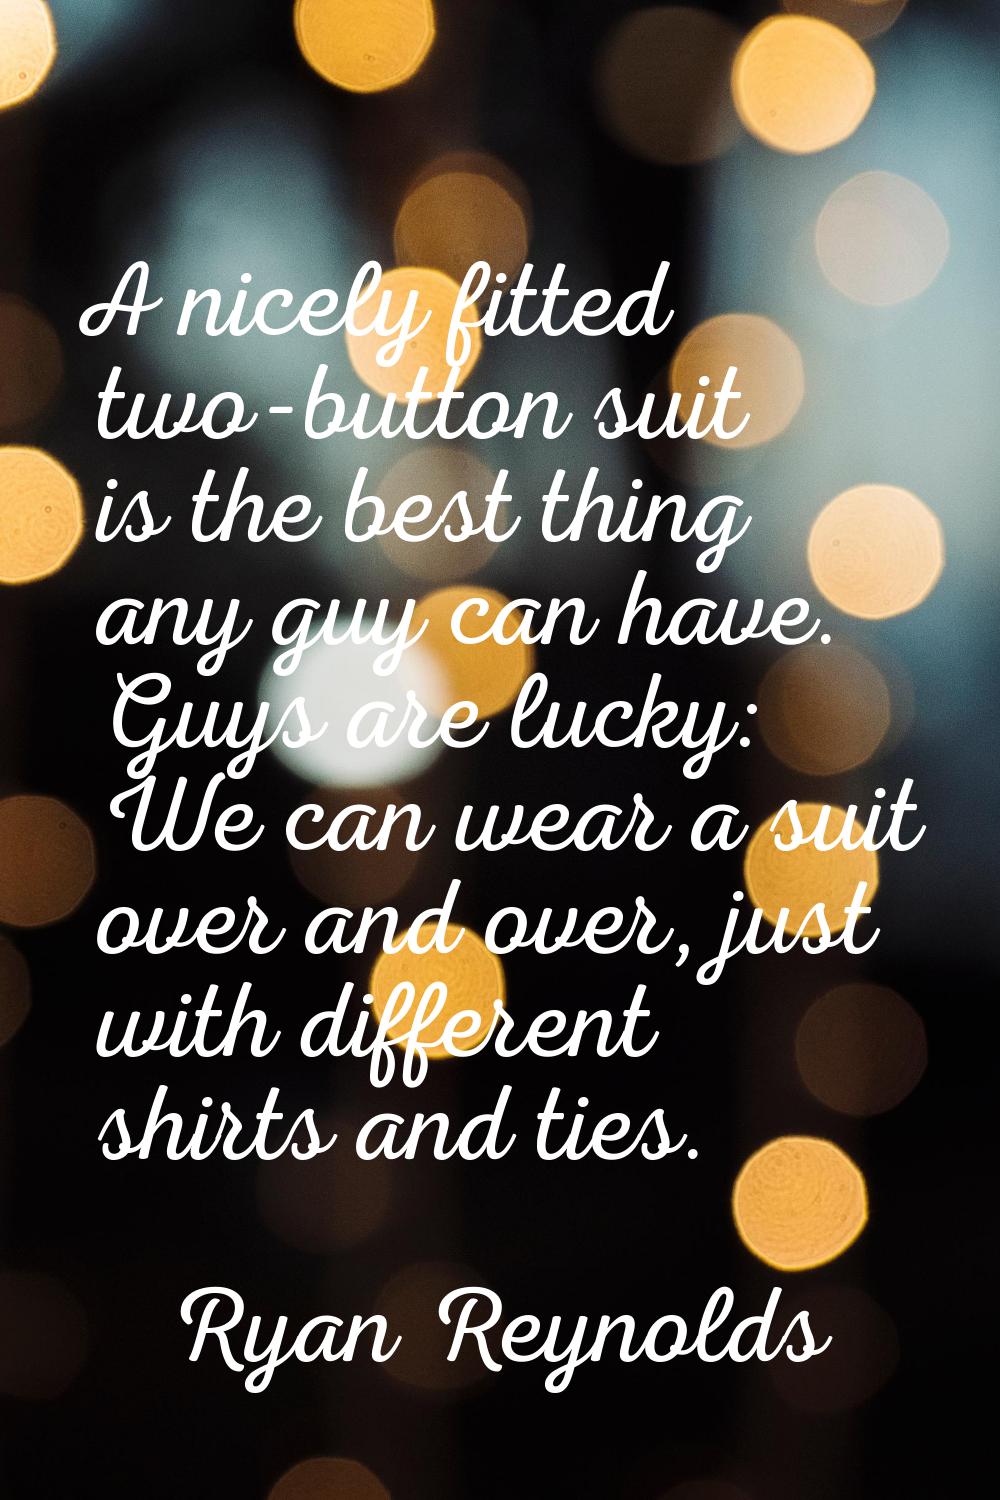 A nicely fitted two-button suit is the best thing any guy can have. Guys are lucky: We can wear a s